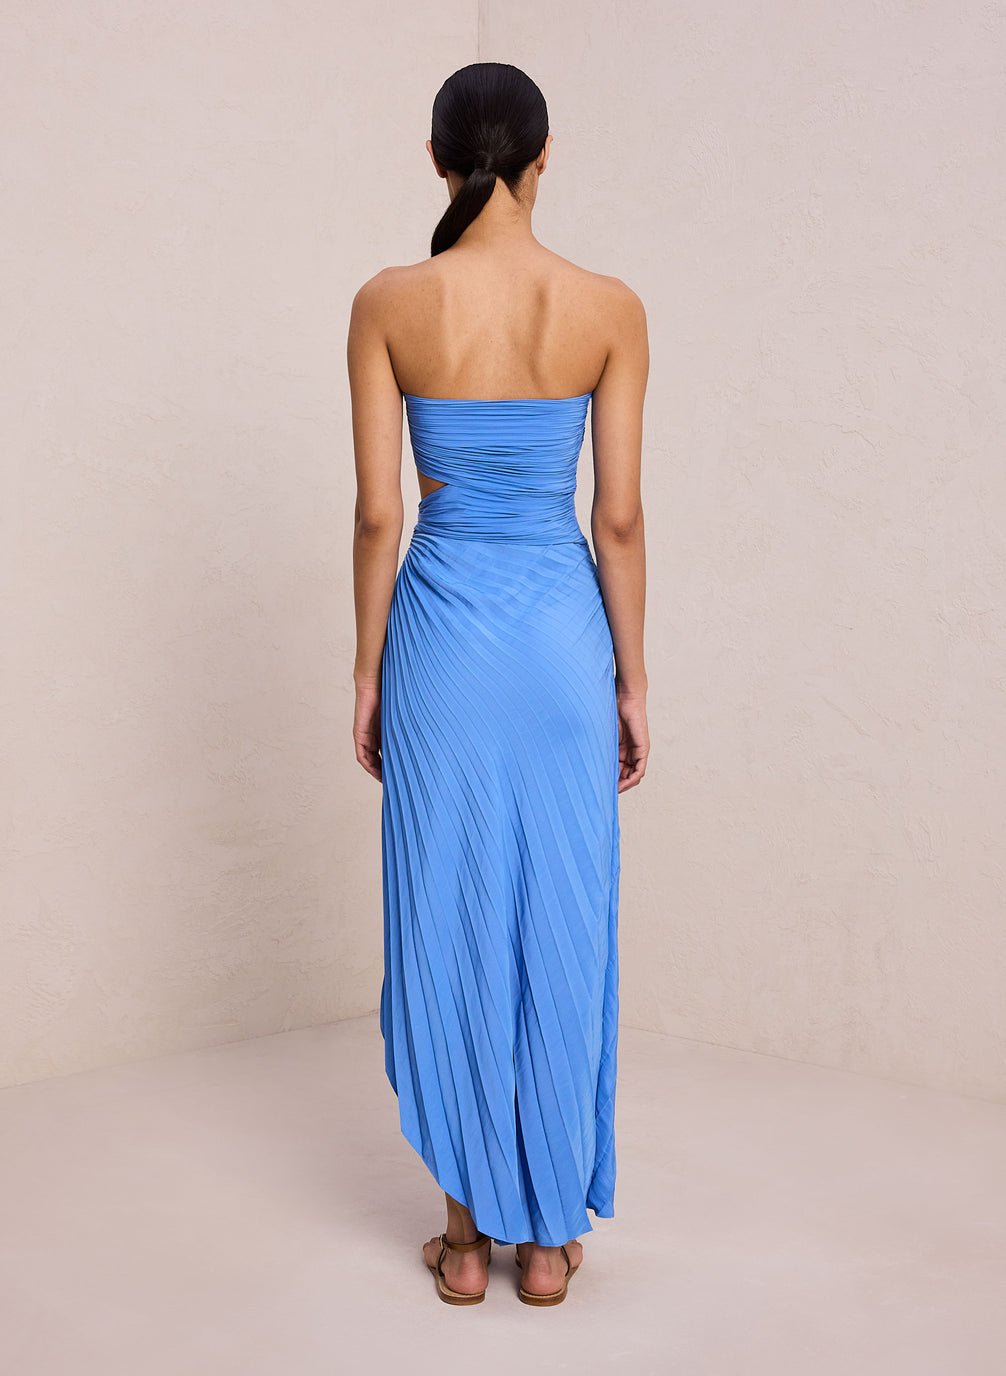 Andie Strapless Pleated Dress